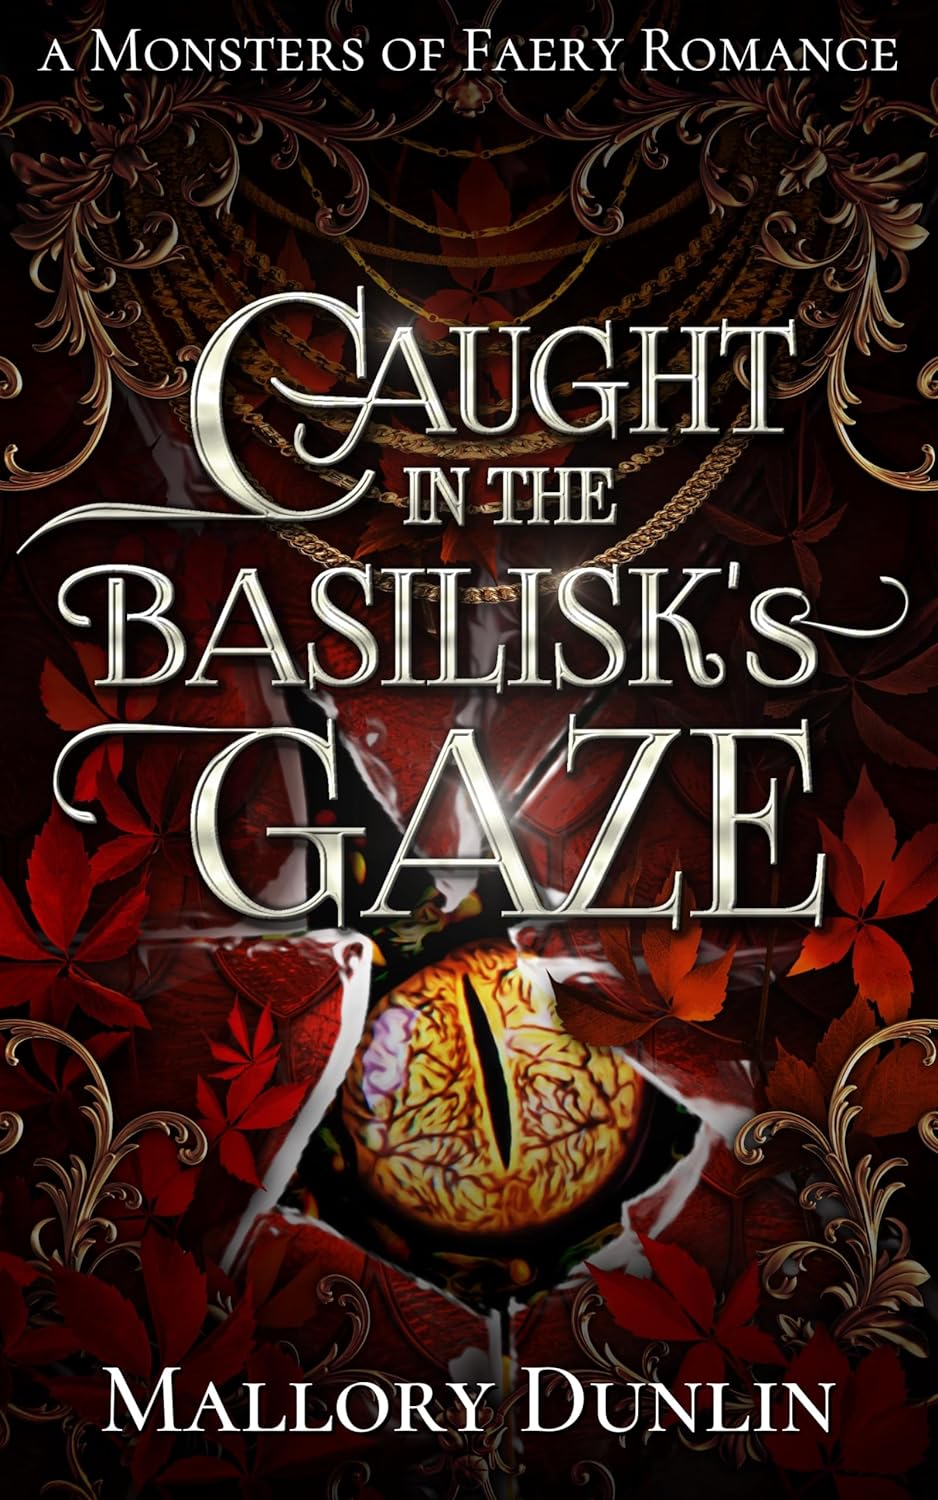 Caught in the Basilisk’s Gaze by Mallory Dunlin